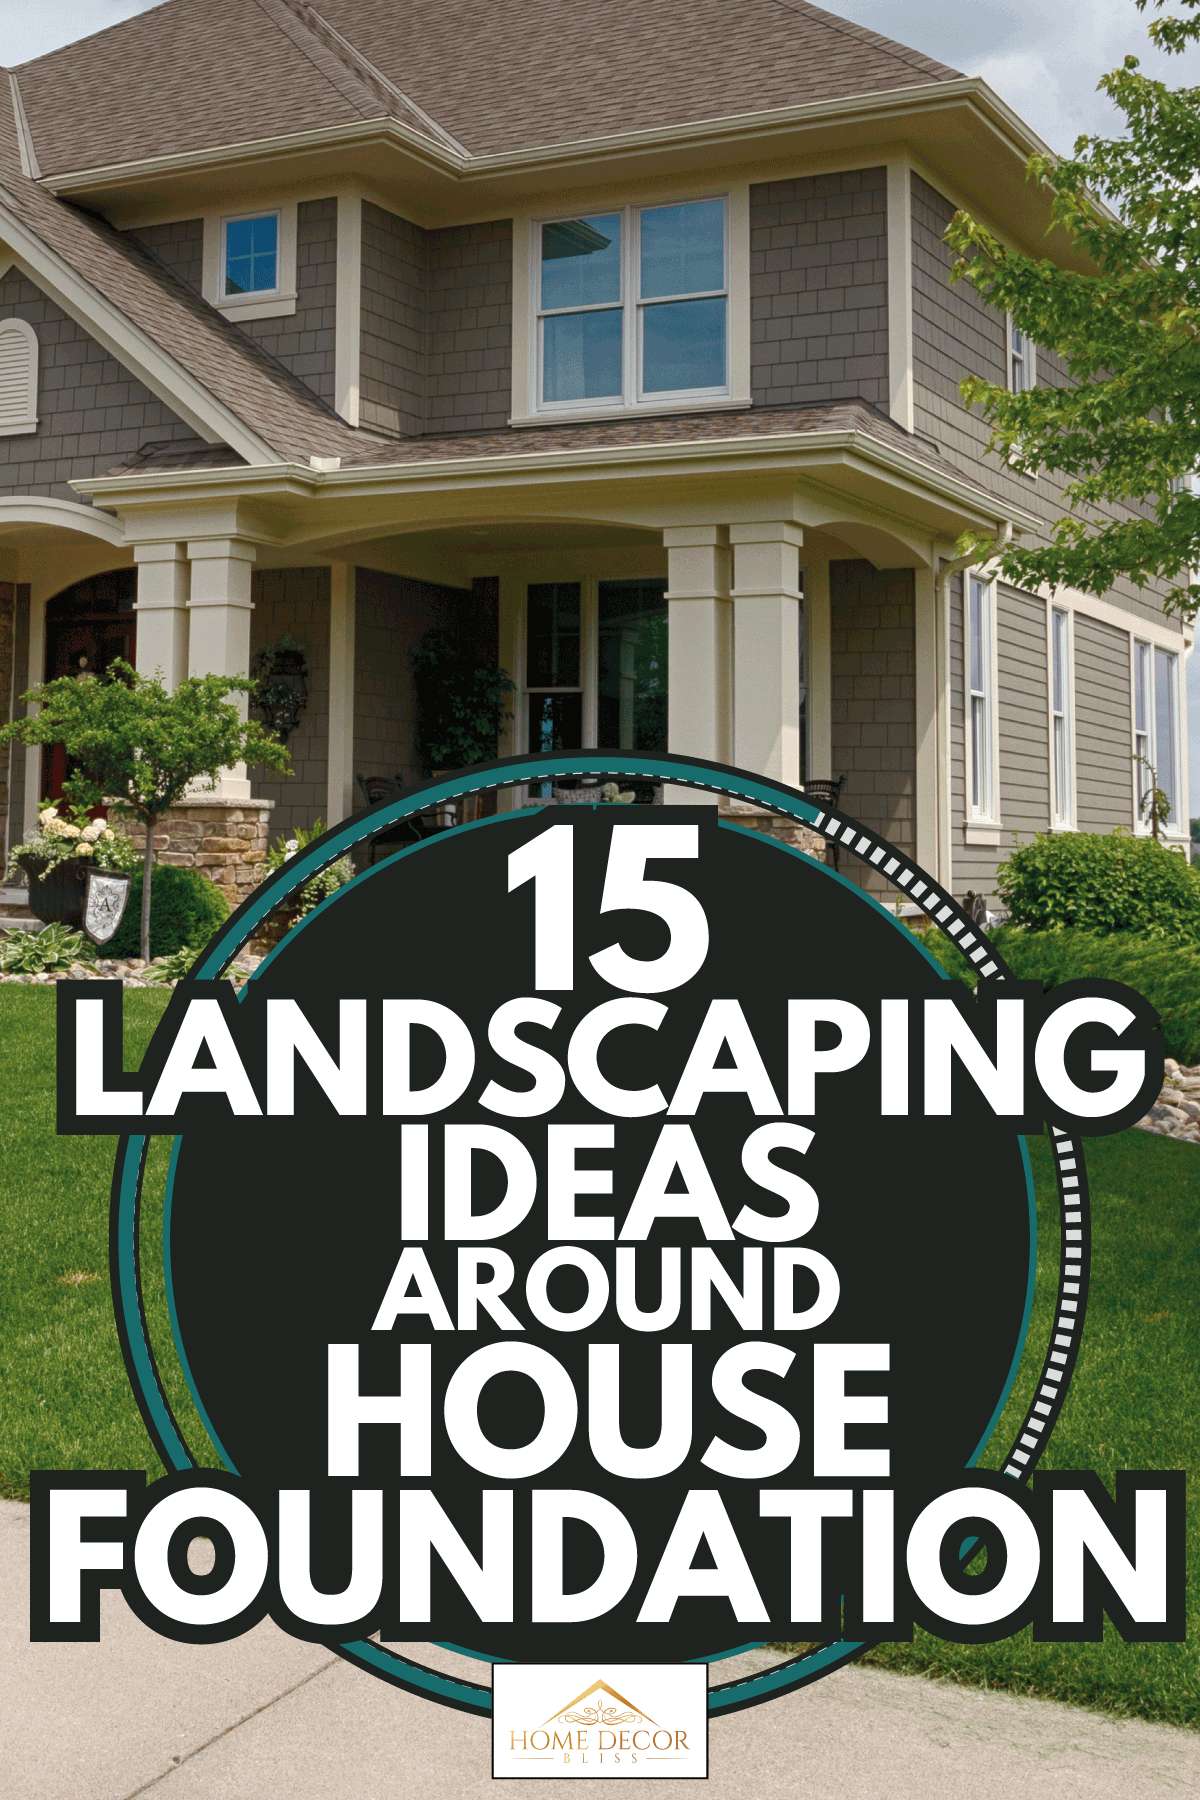 suburban home with landscaping for the front and backyard. 15 Landscaping Ideas Around House Foundation